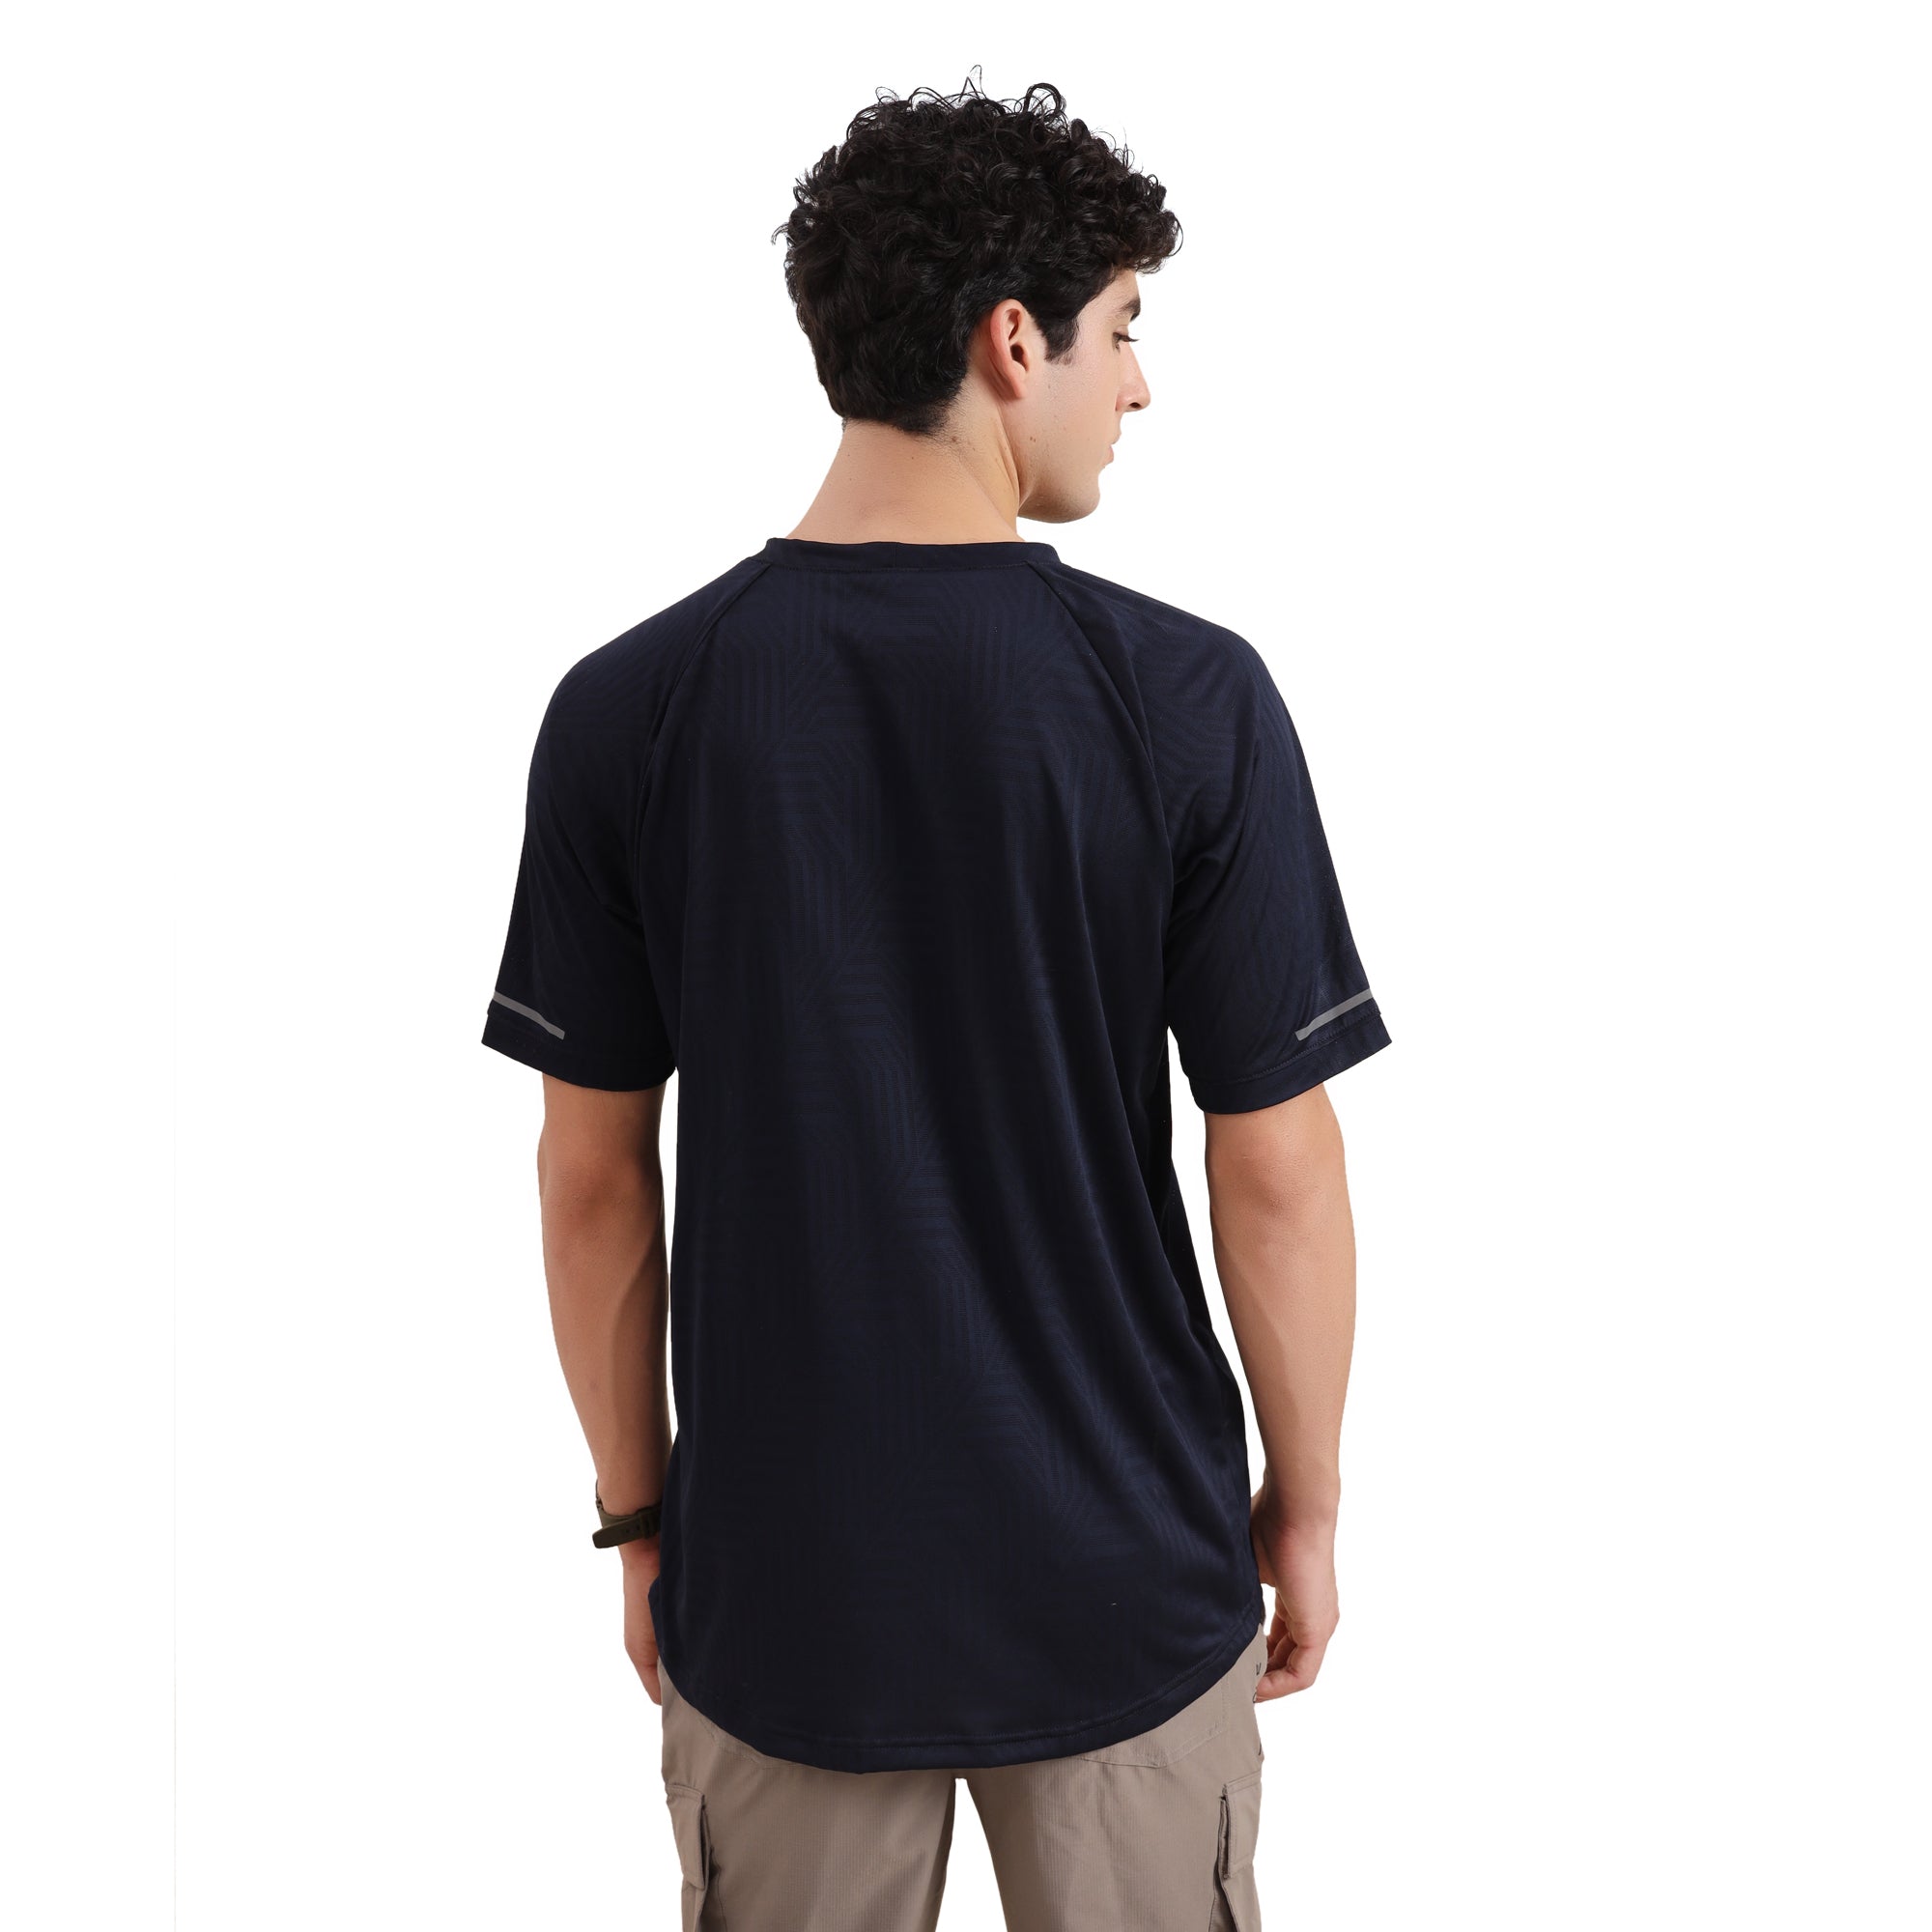 Outdoor Sportswear T-Shirt for Hiking, Running and Gyming | Navy Blue XXL